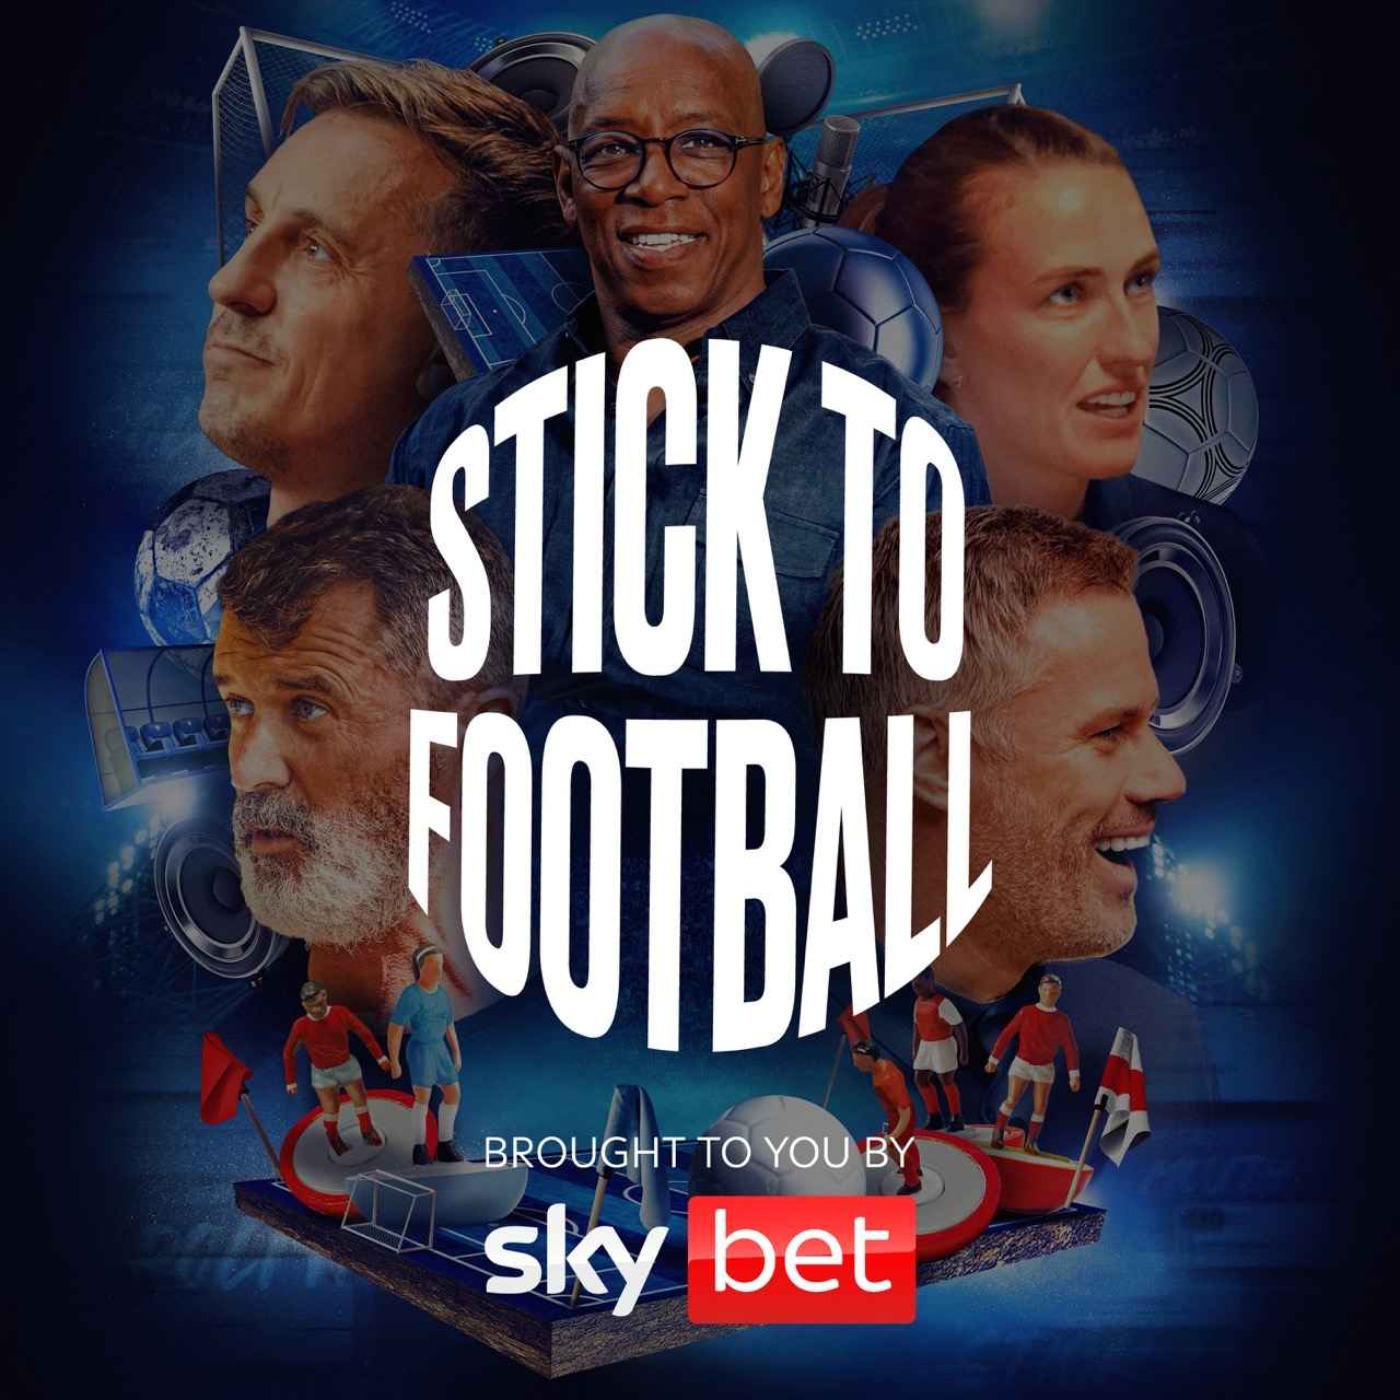 Roy & Wrighty Clash, Cats vs Dogs & Carra is LATE! | Stick to Football EP 29